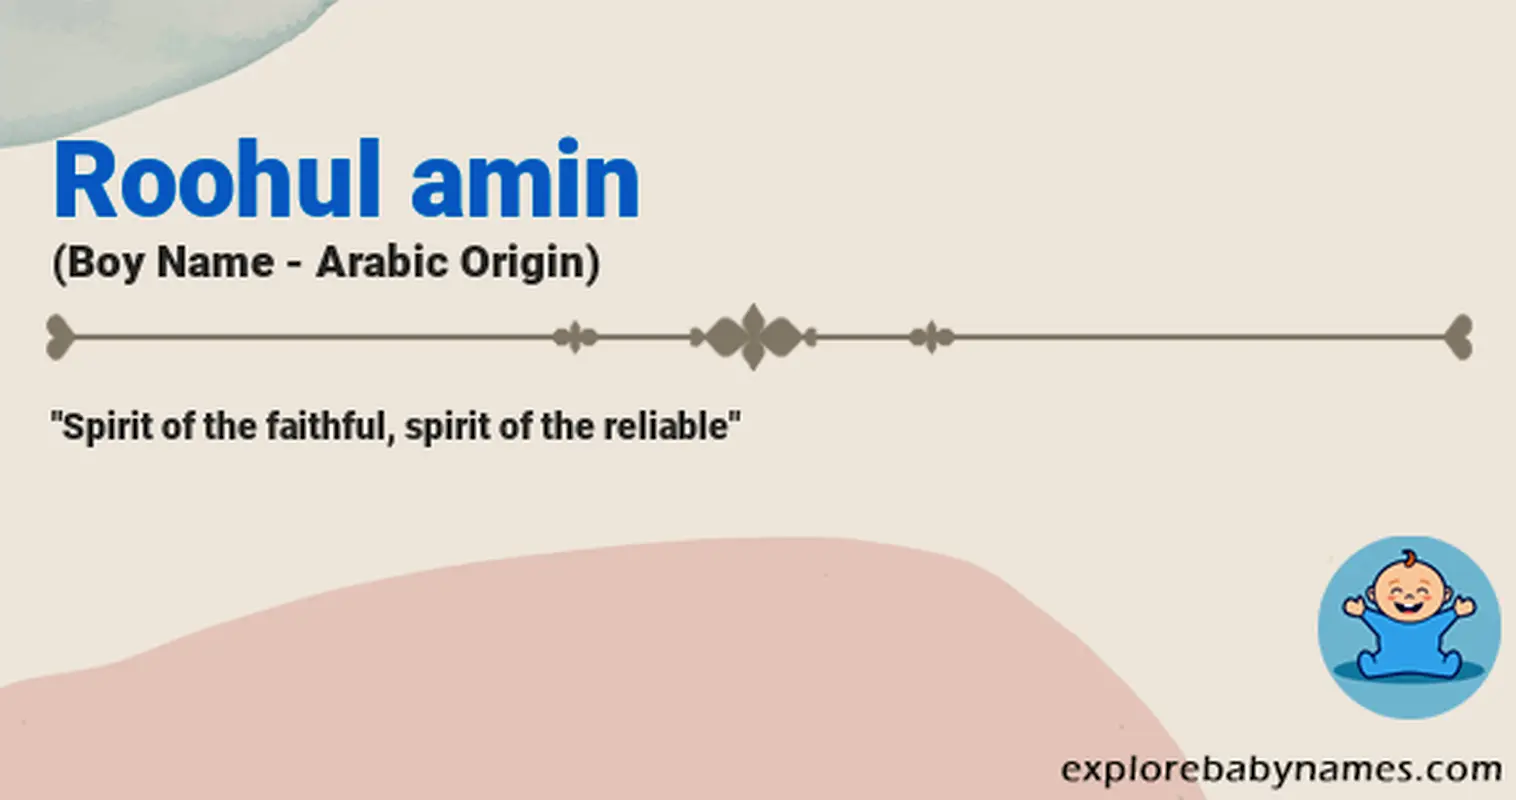 Meaning of Roohul amin